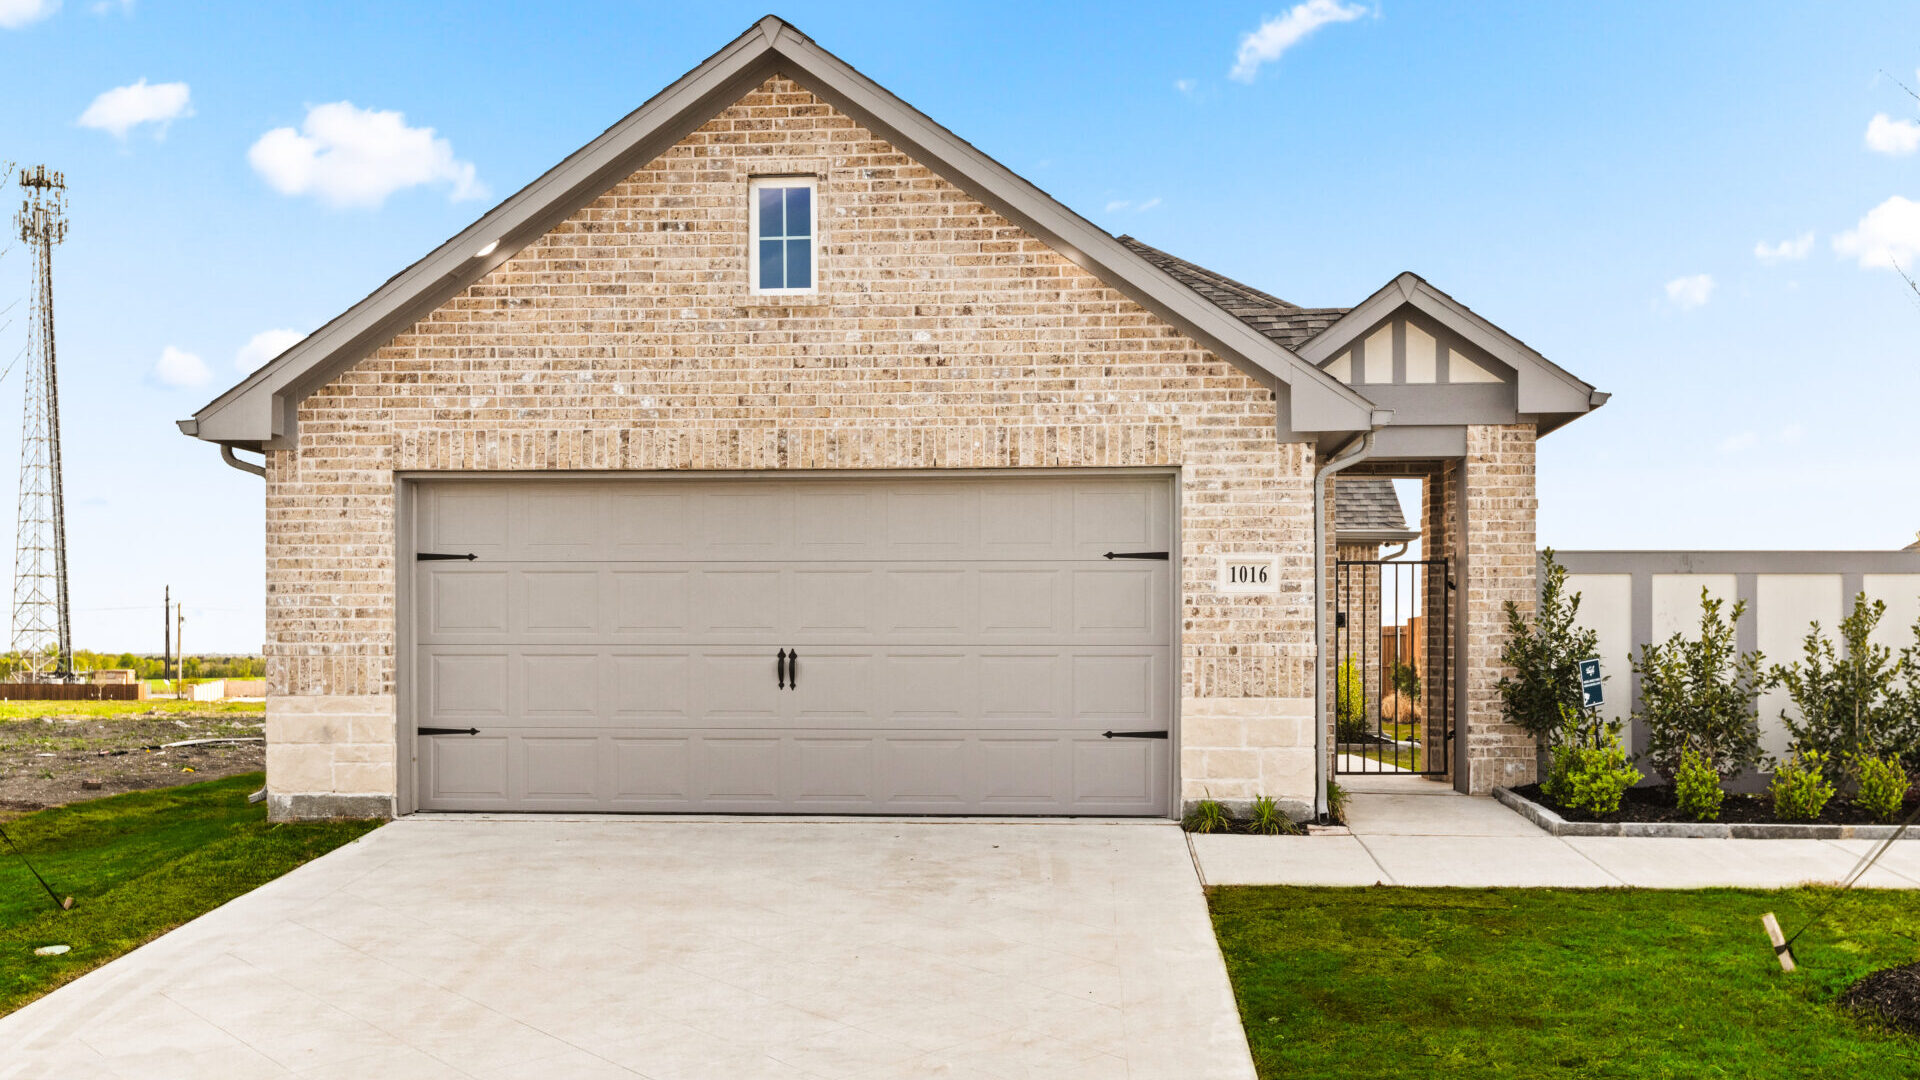  Elevon South - Three New Models Now Open! New Homes in Lavon